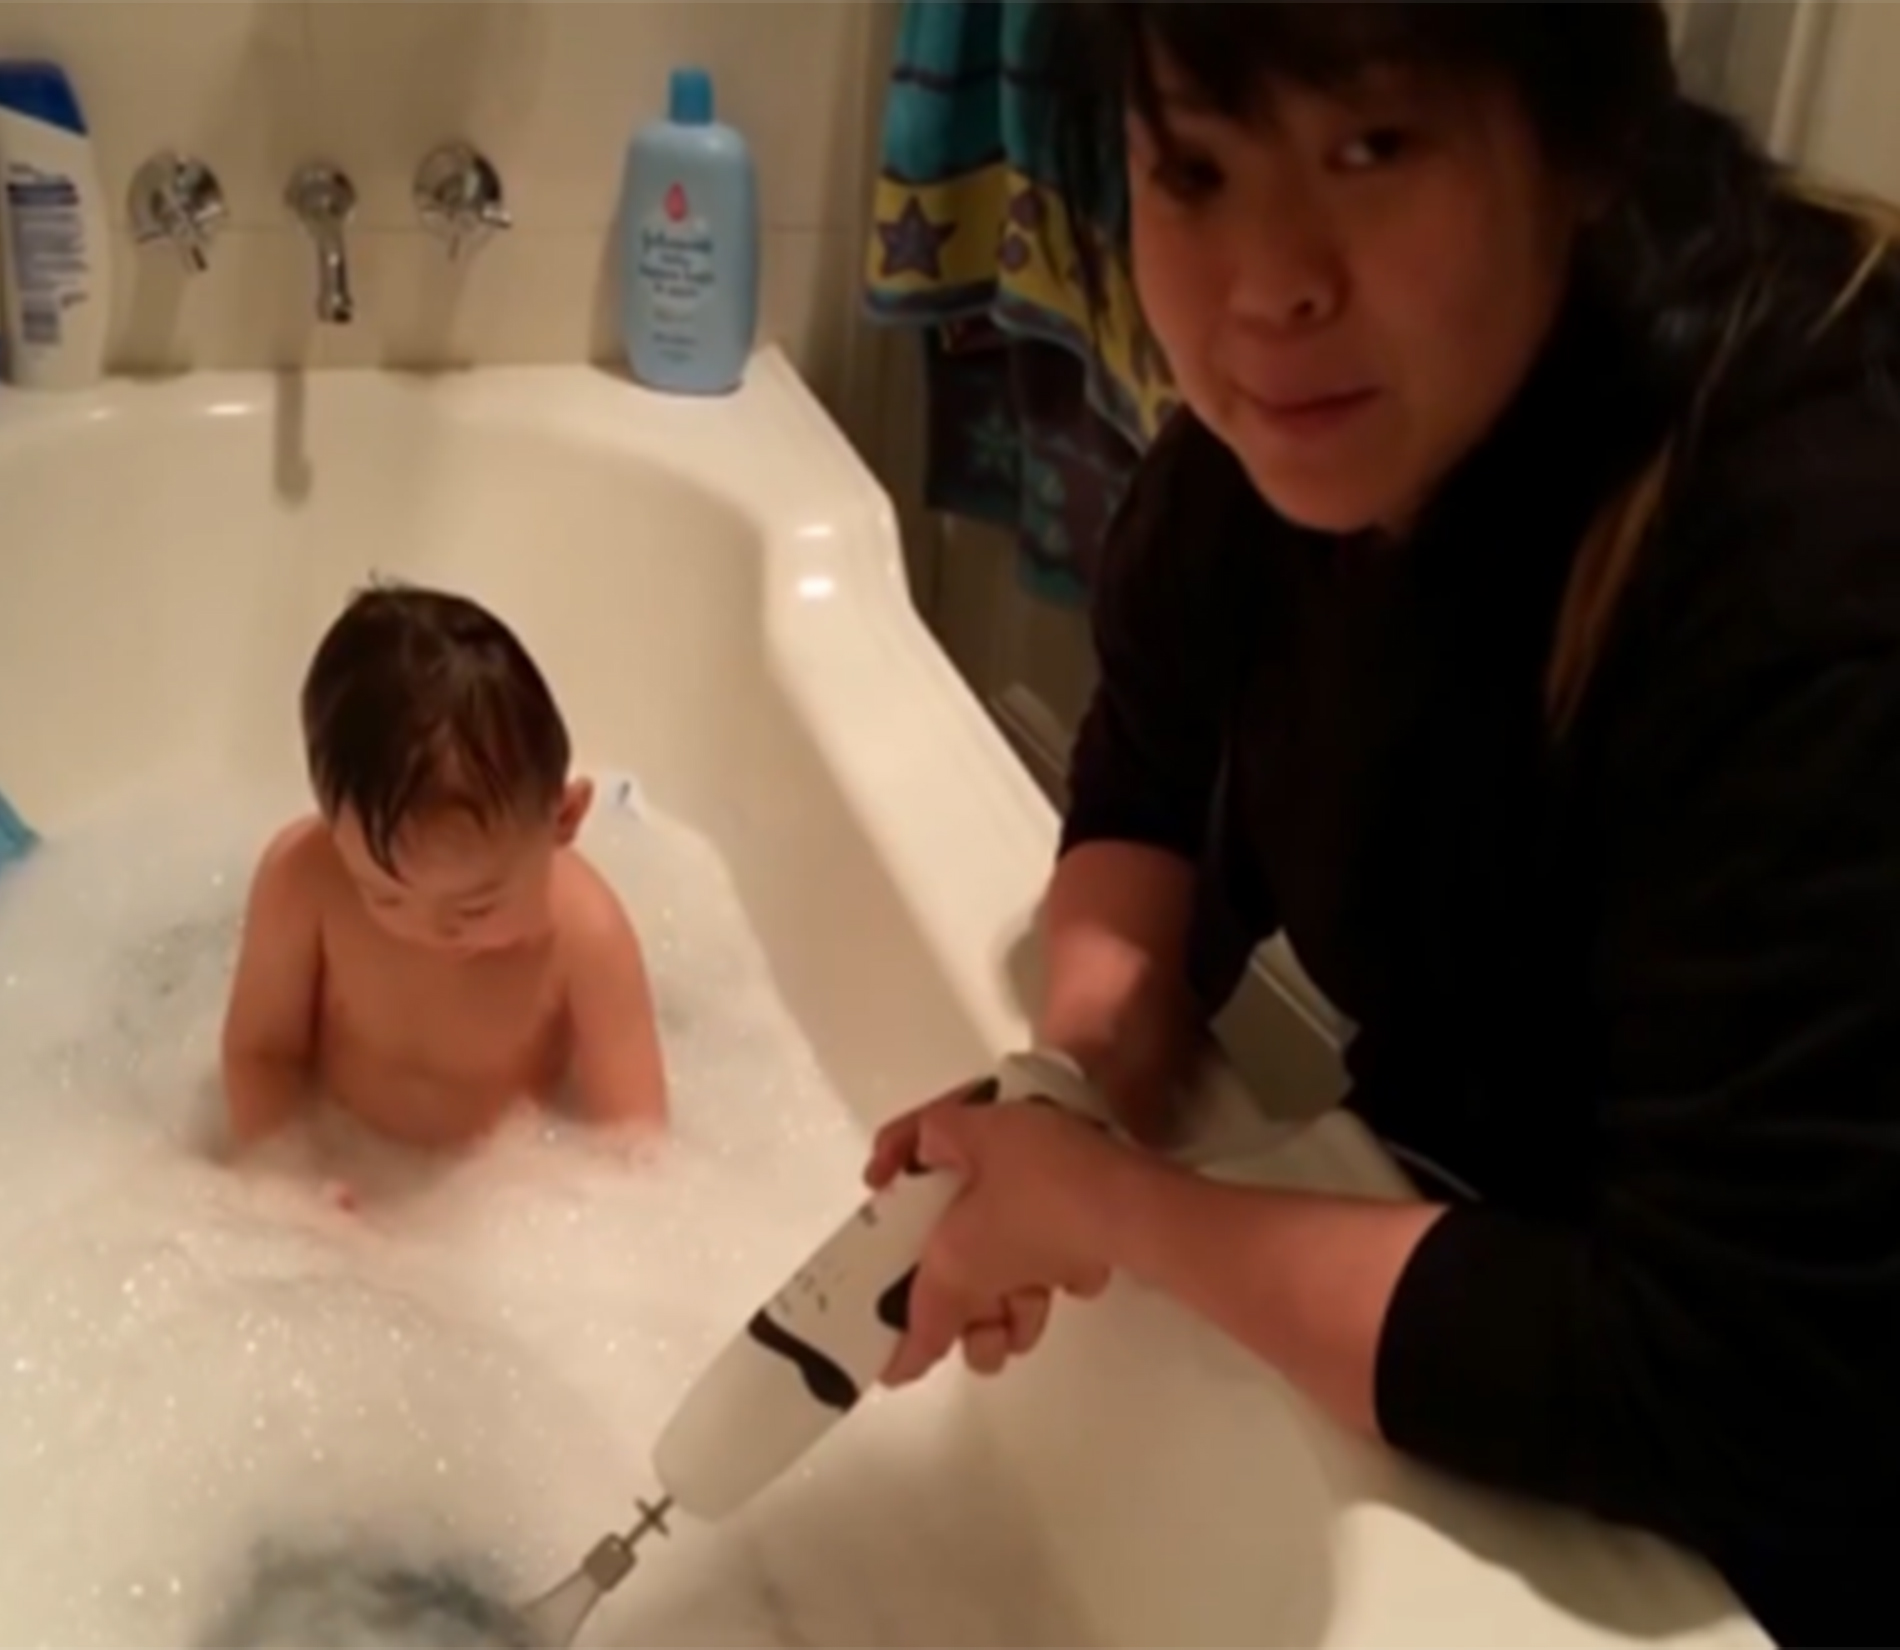 Baby's bubble butt bath time with electric beater